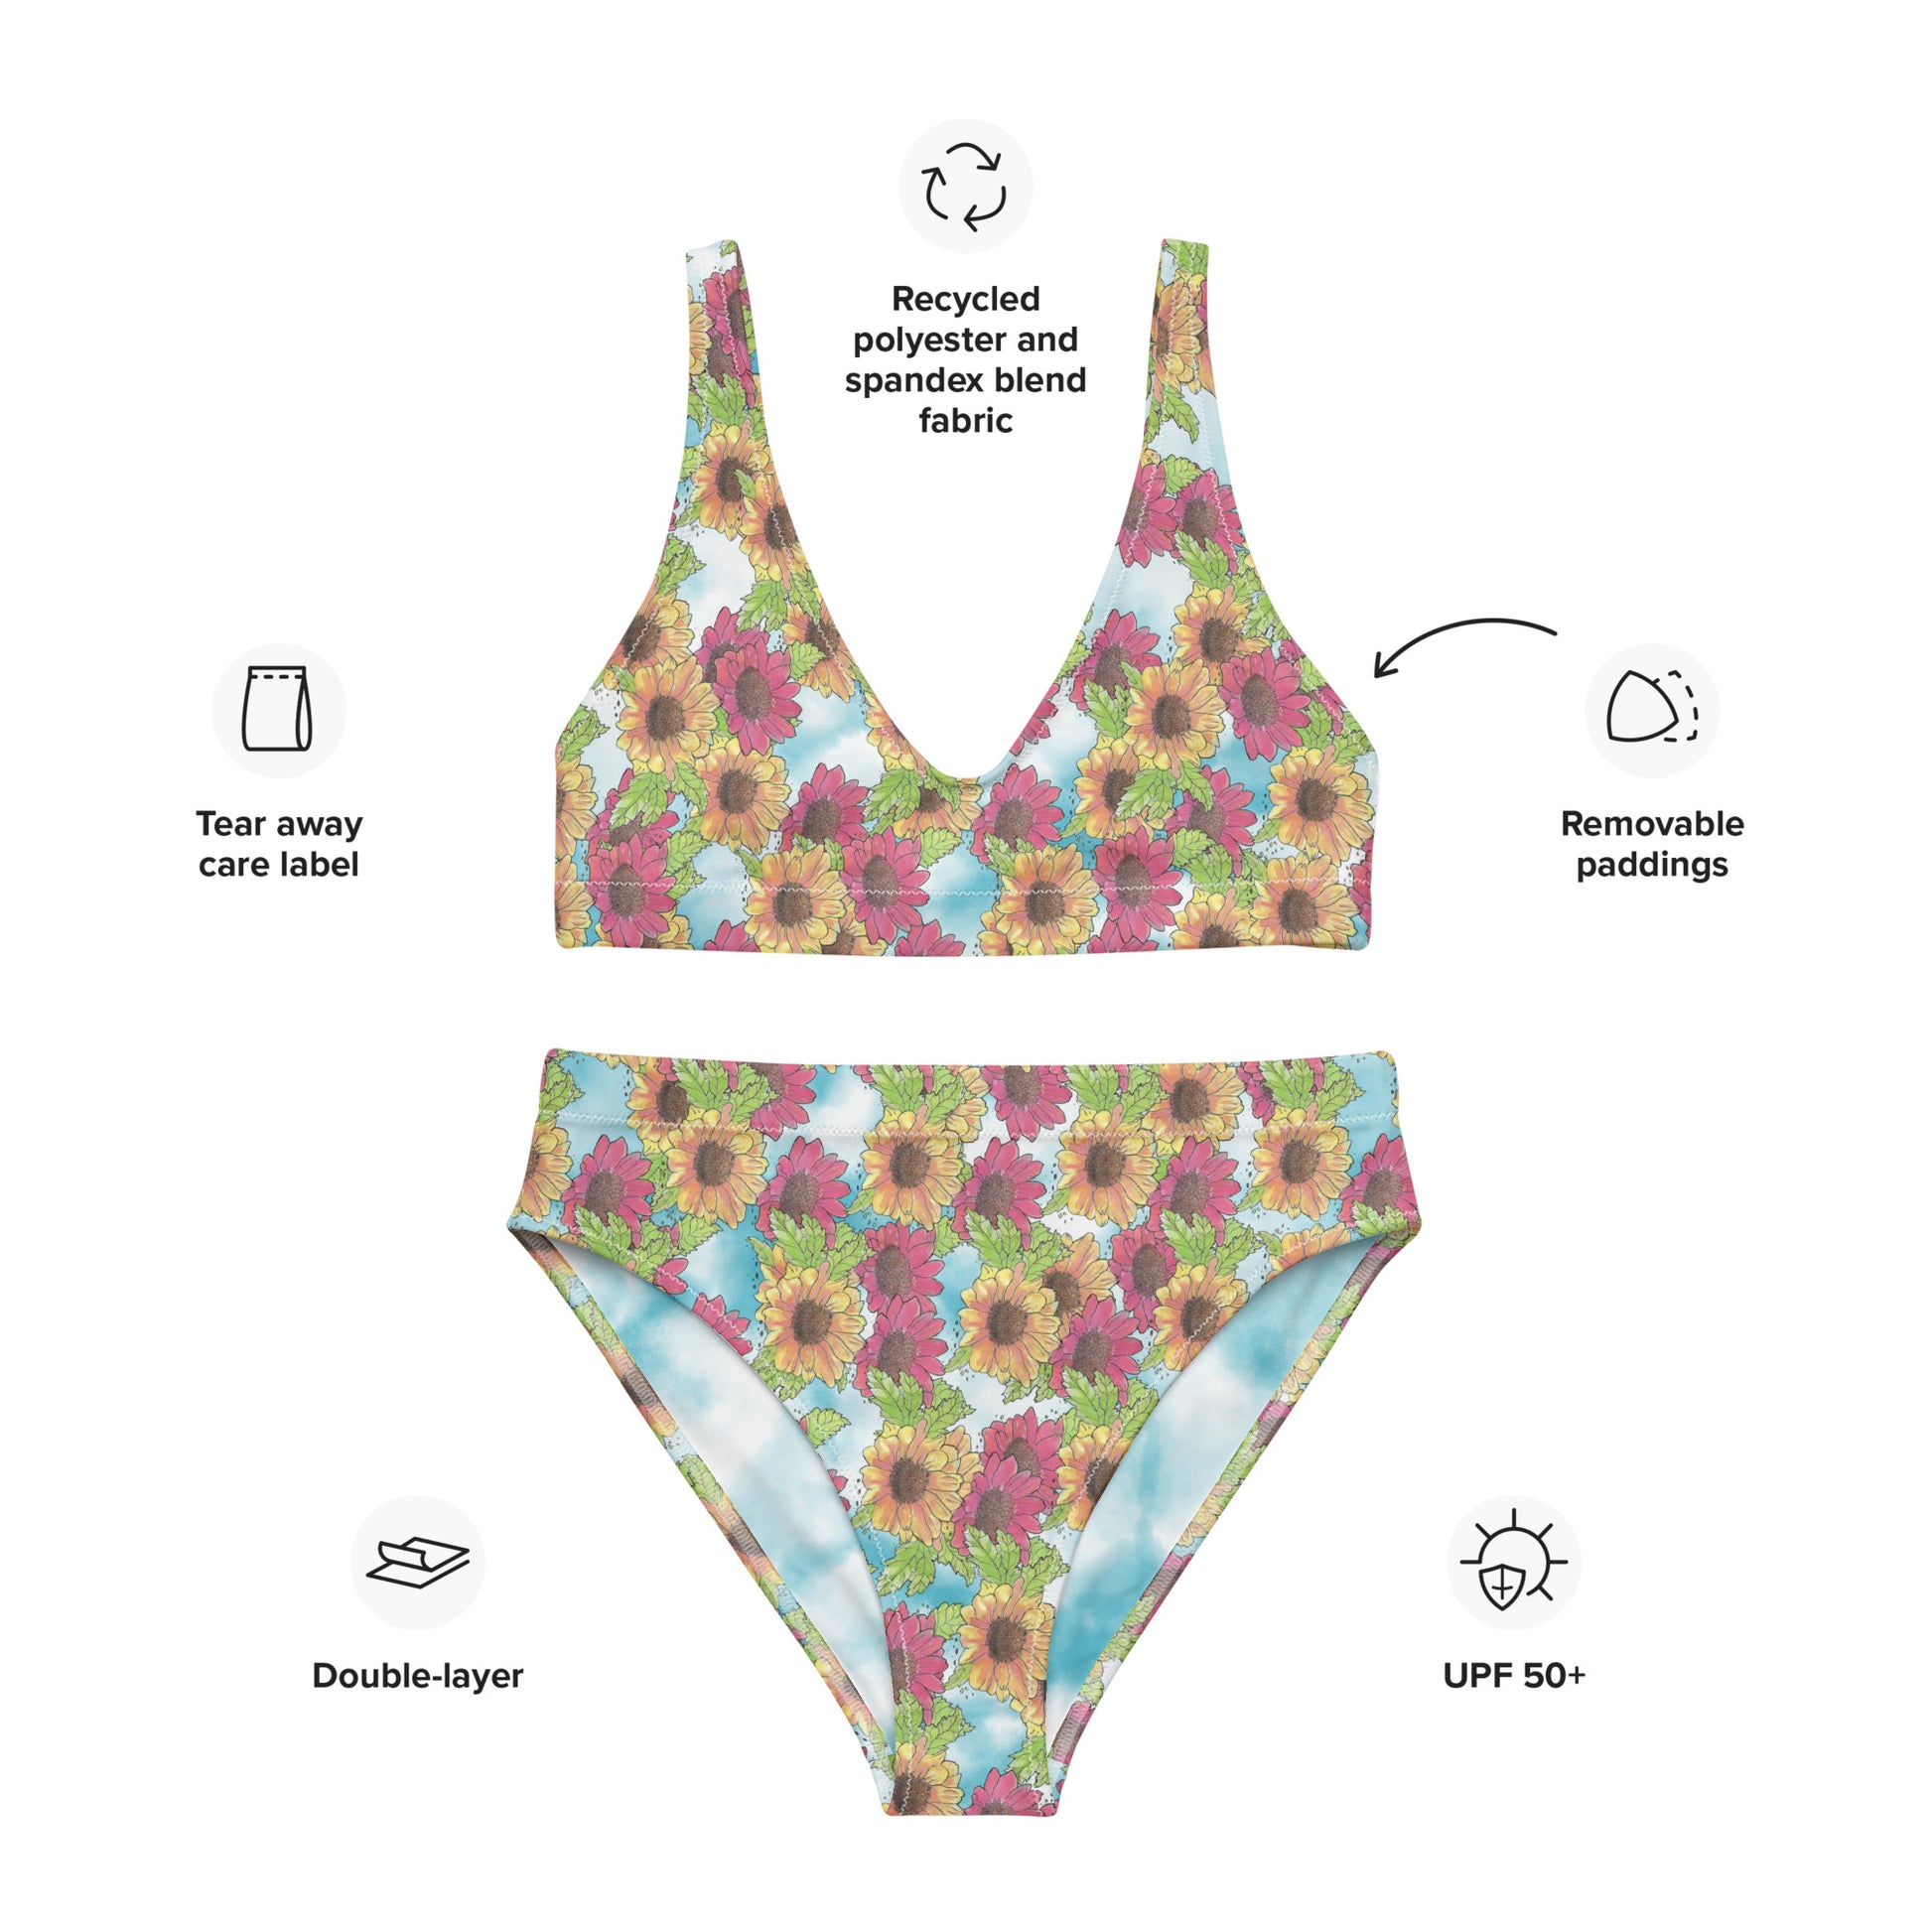 Watercolor Gerber daisy patterned high-waisted bikini. Made from recycled polyester and spandex. Features removable pads and double layers.